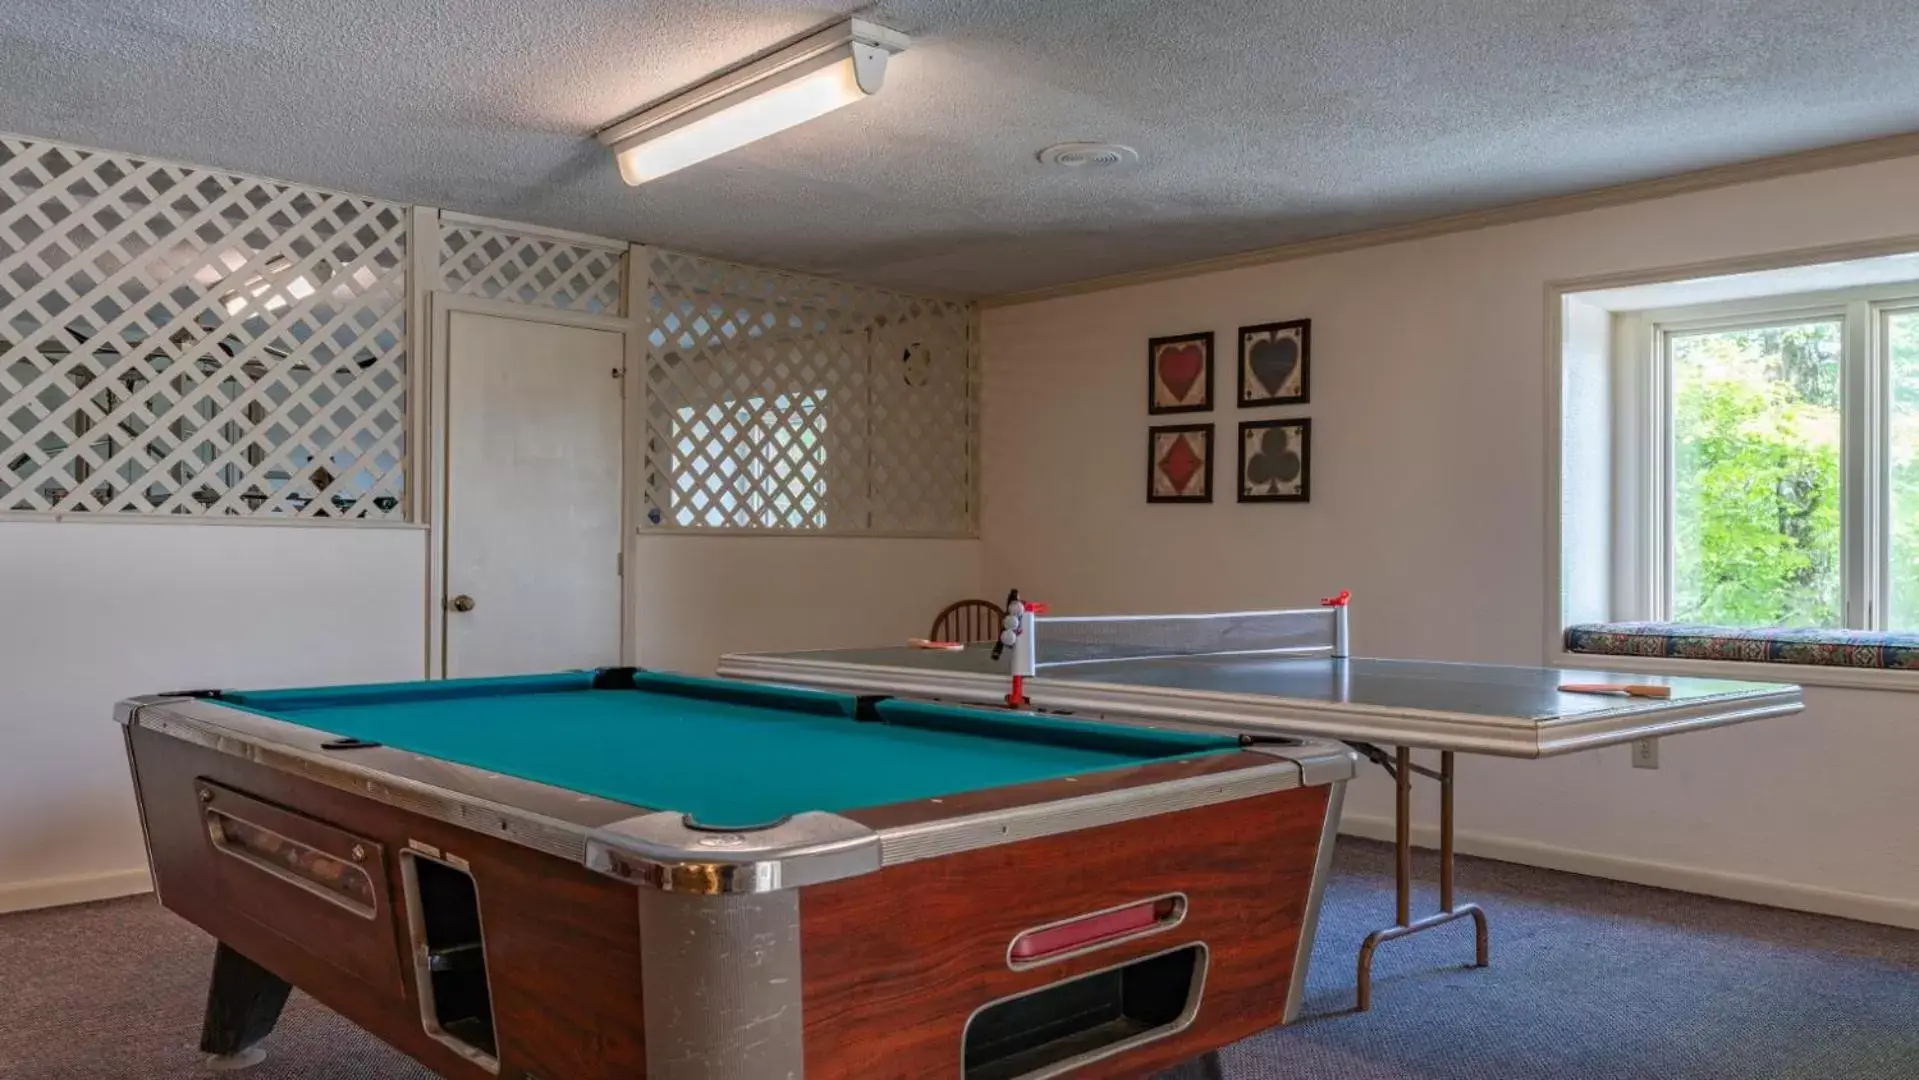 Game Room, Billiards in 4 Seasons at Beech Mountain